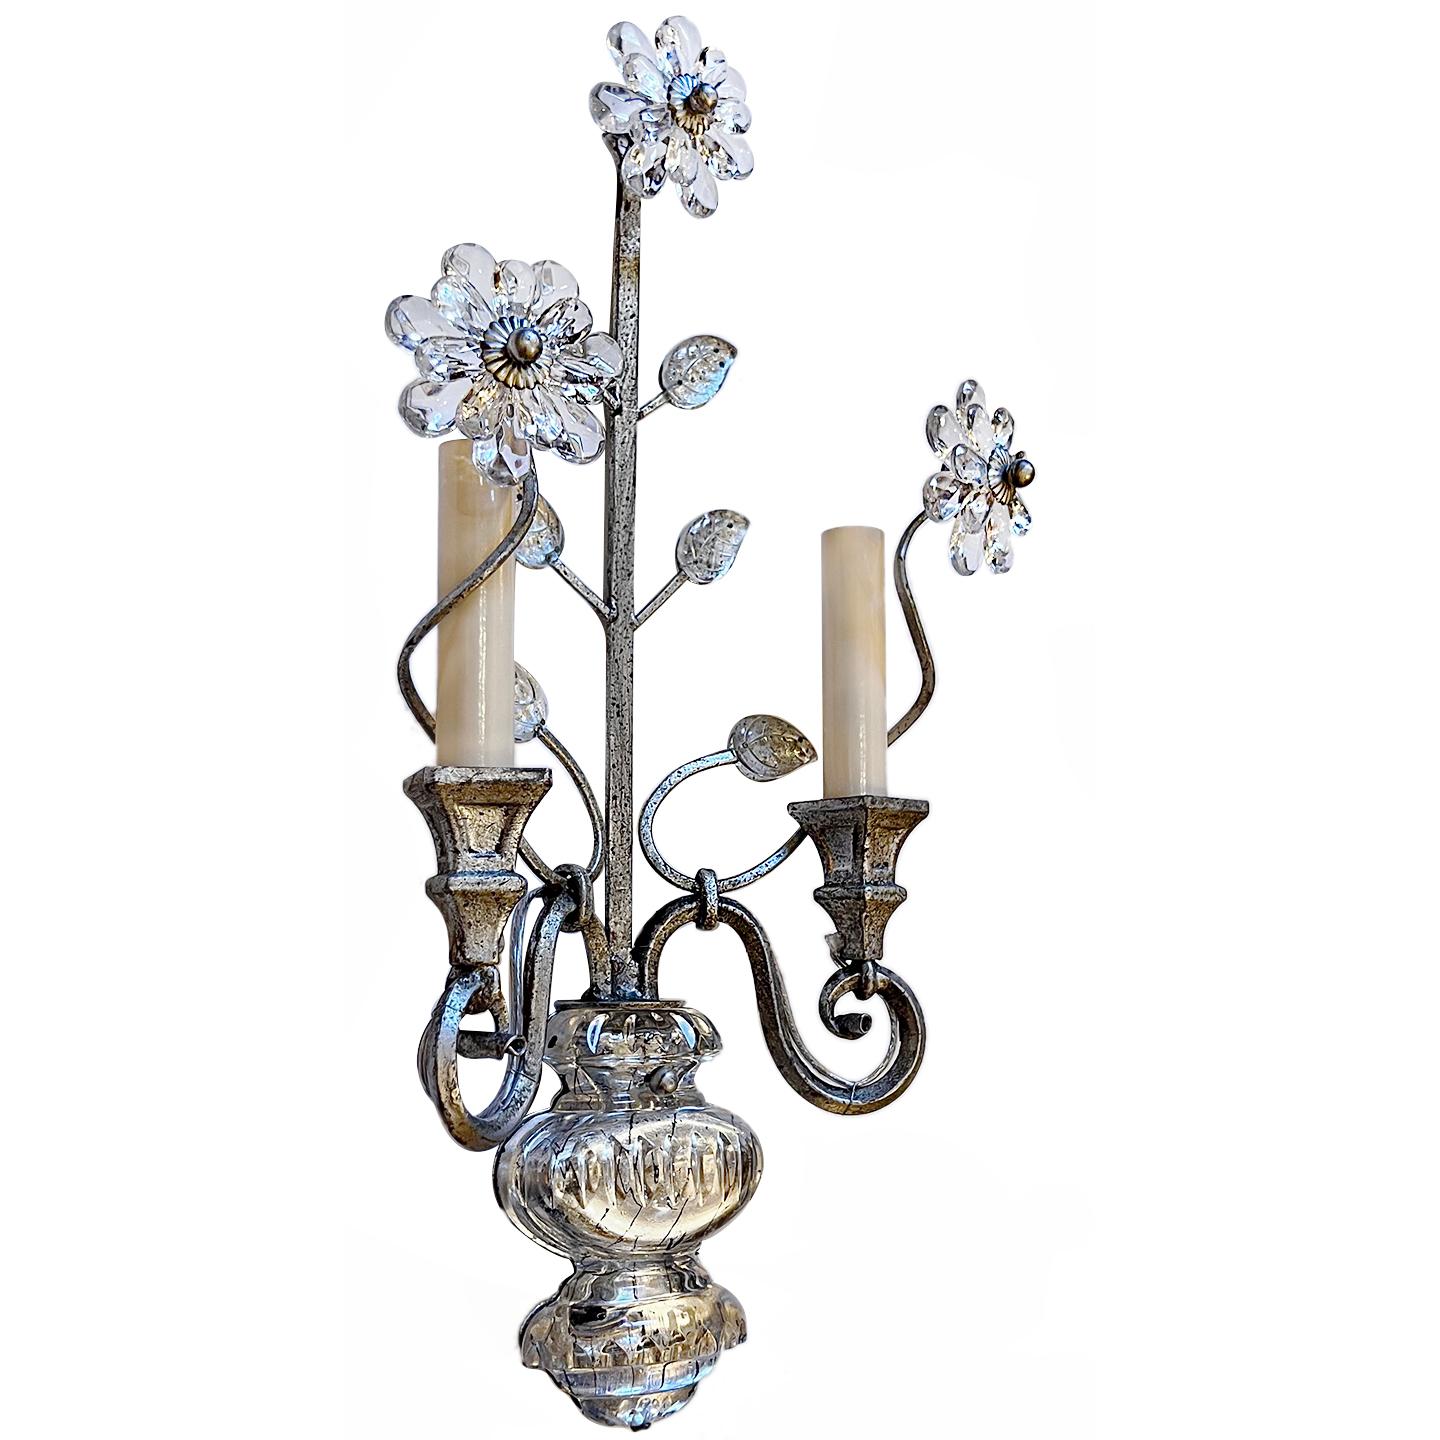 Pair of circa 1950's French double light sconces with molded glass leaves and crystal flowers.

Measurements:
Height: 18.25